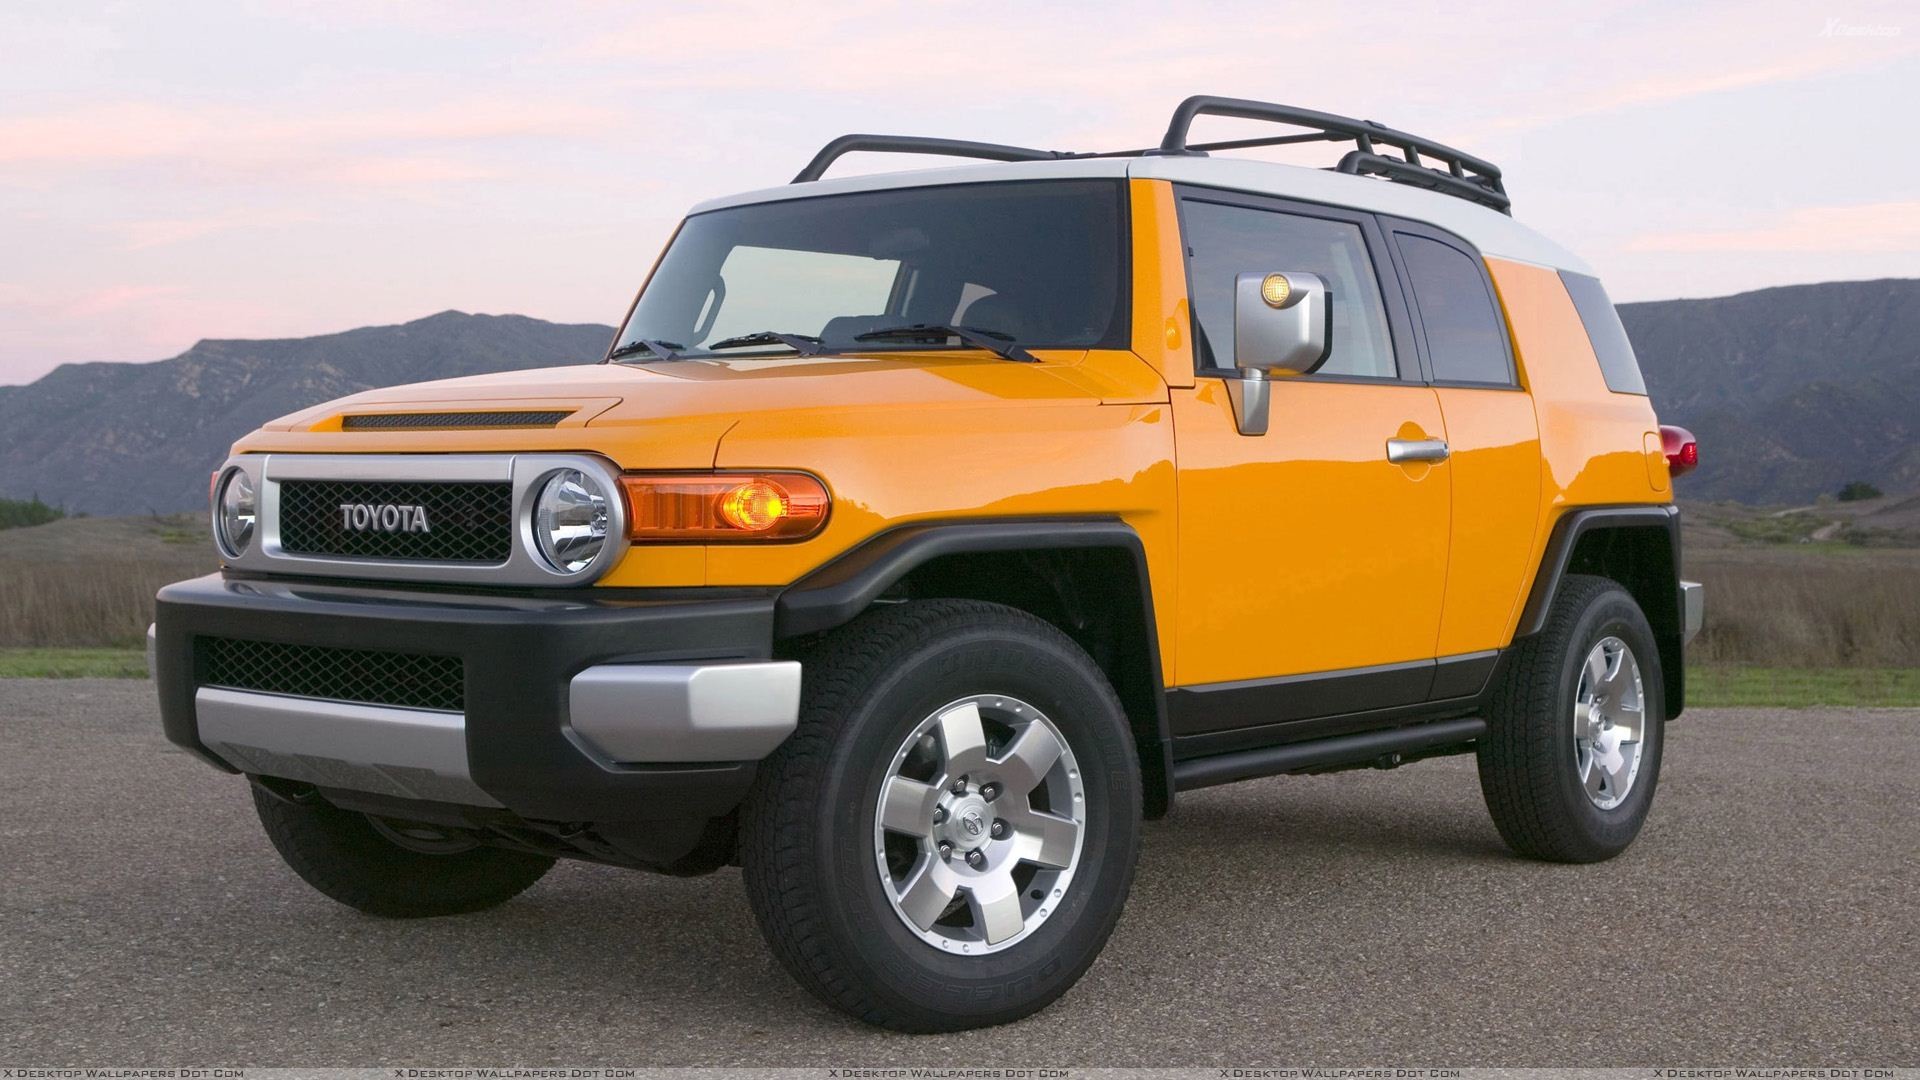 1920x1080 You are viewing wallpaper titled "2009 Toyota FJ Cruiser ...